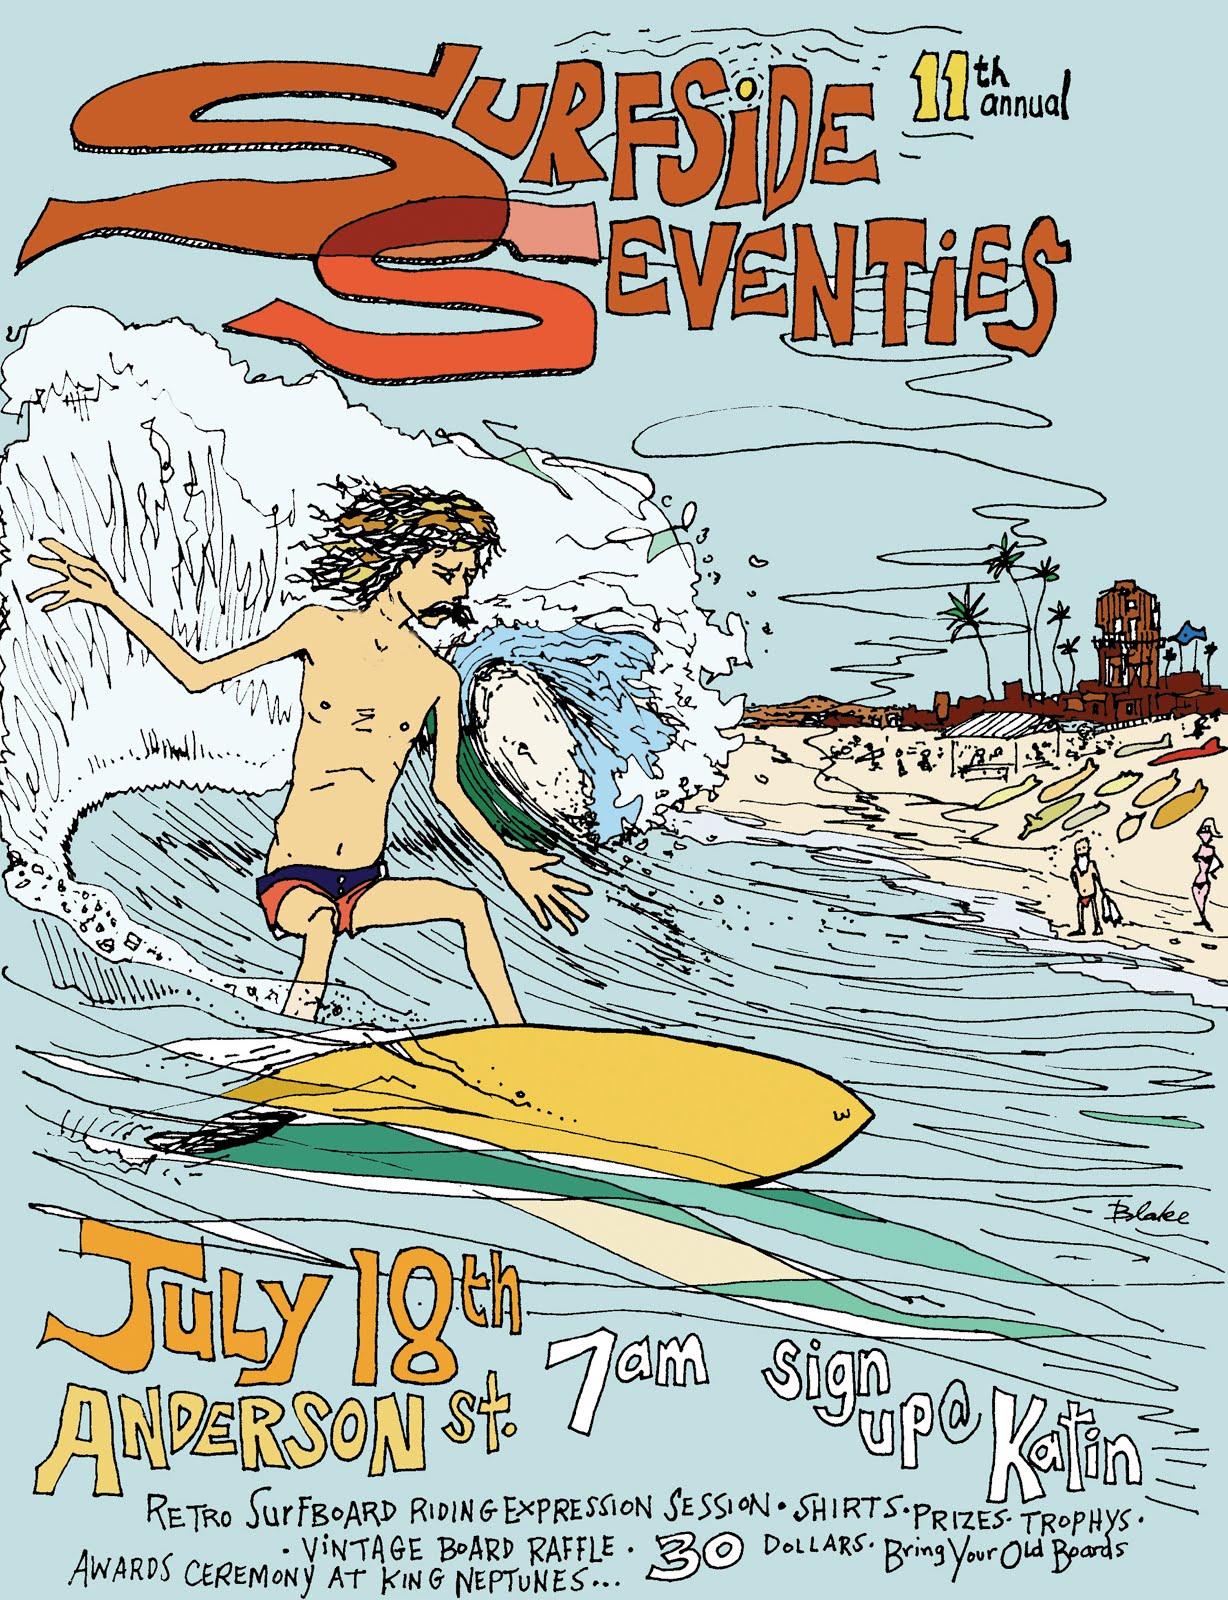 2009 11th annual Surfside Seventies poster